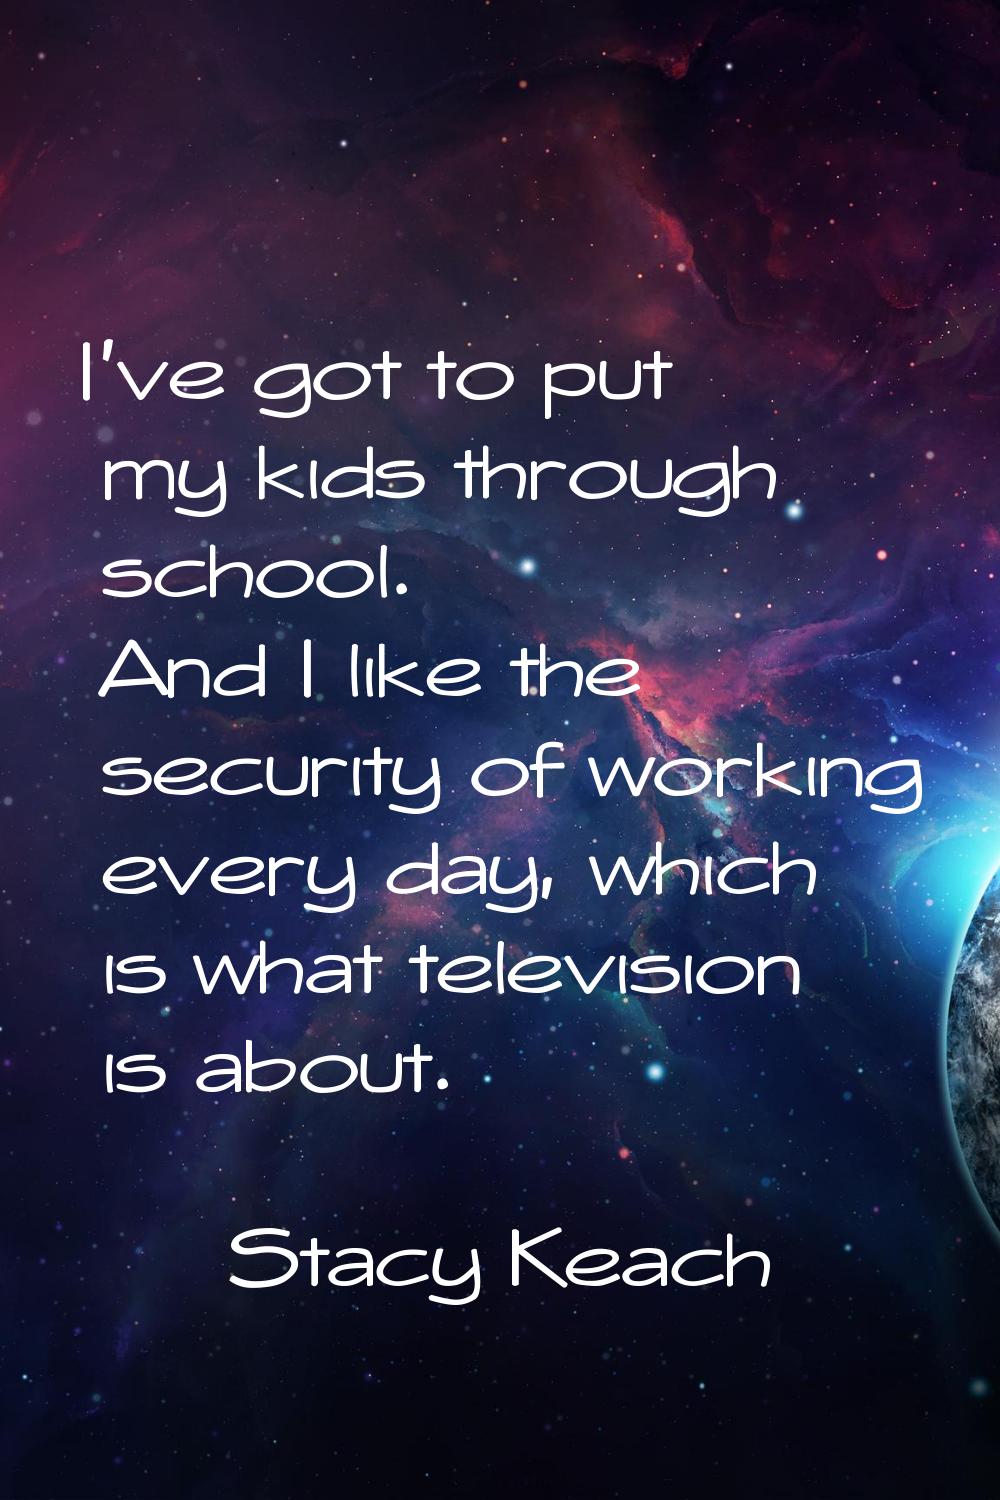 I've got to put my kids through school. And I like the security of working every day, which is what